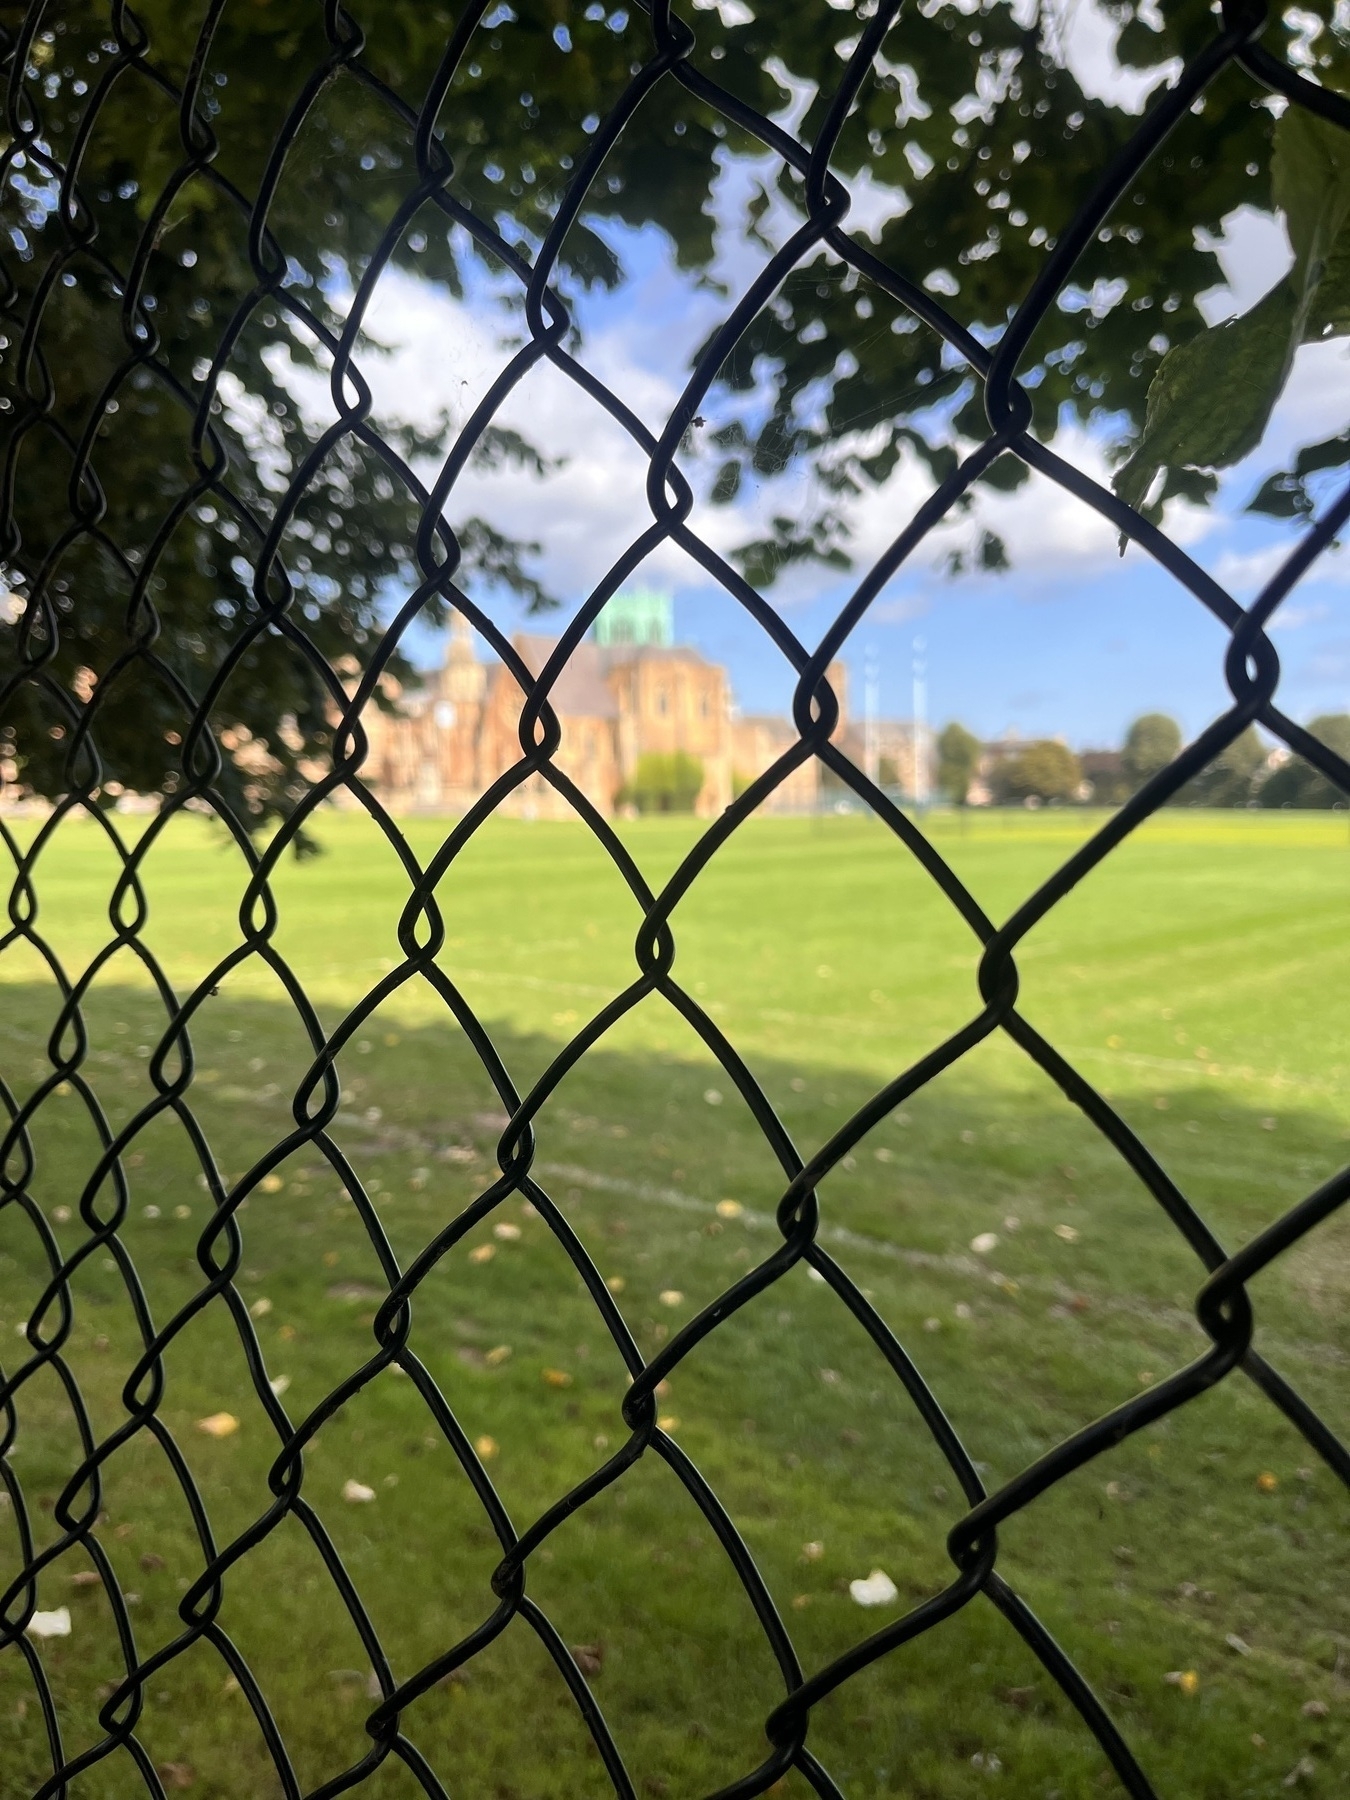 A fence in focus, behind which is a sports playing field and distant buildings.